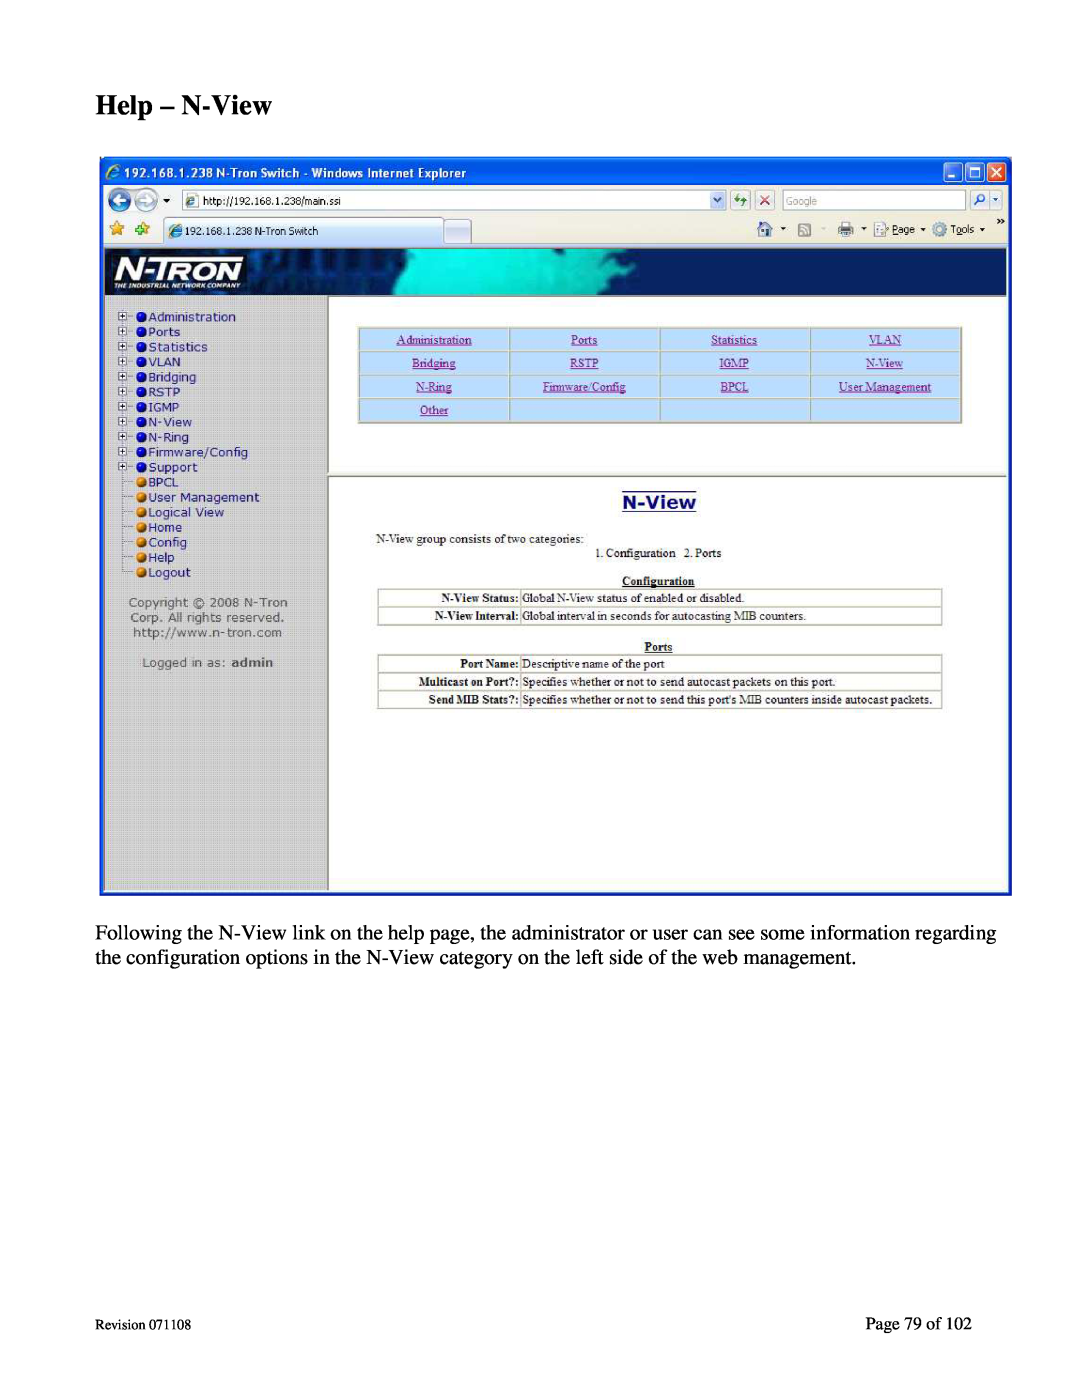 N-Tron 708M12 user manual Help - N-View, Page 79 of, Revision 